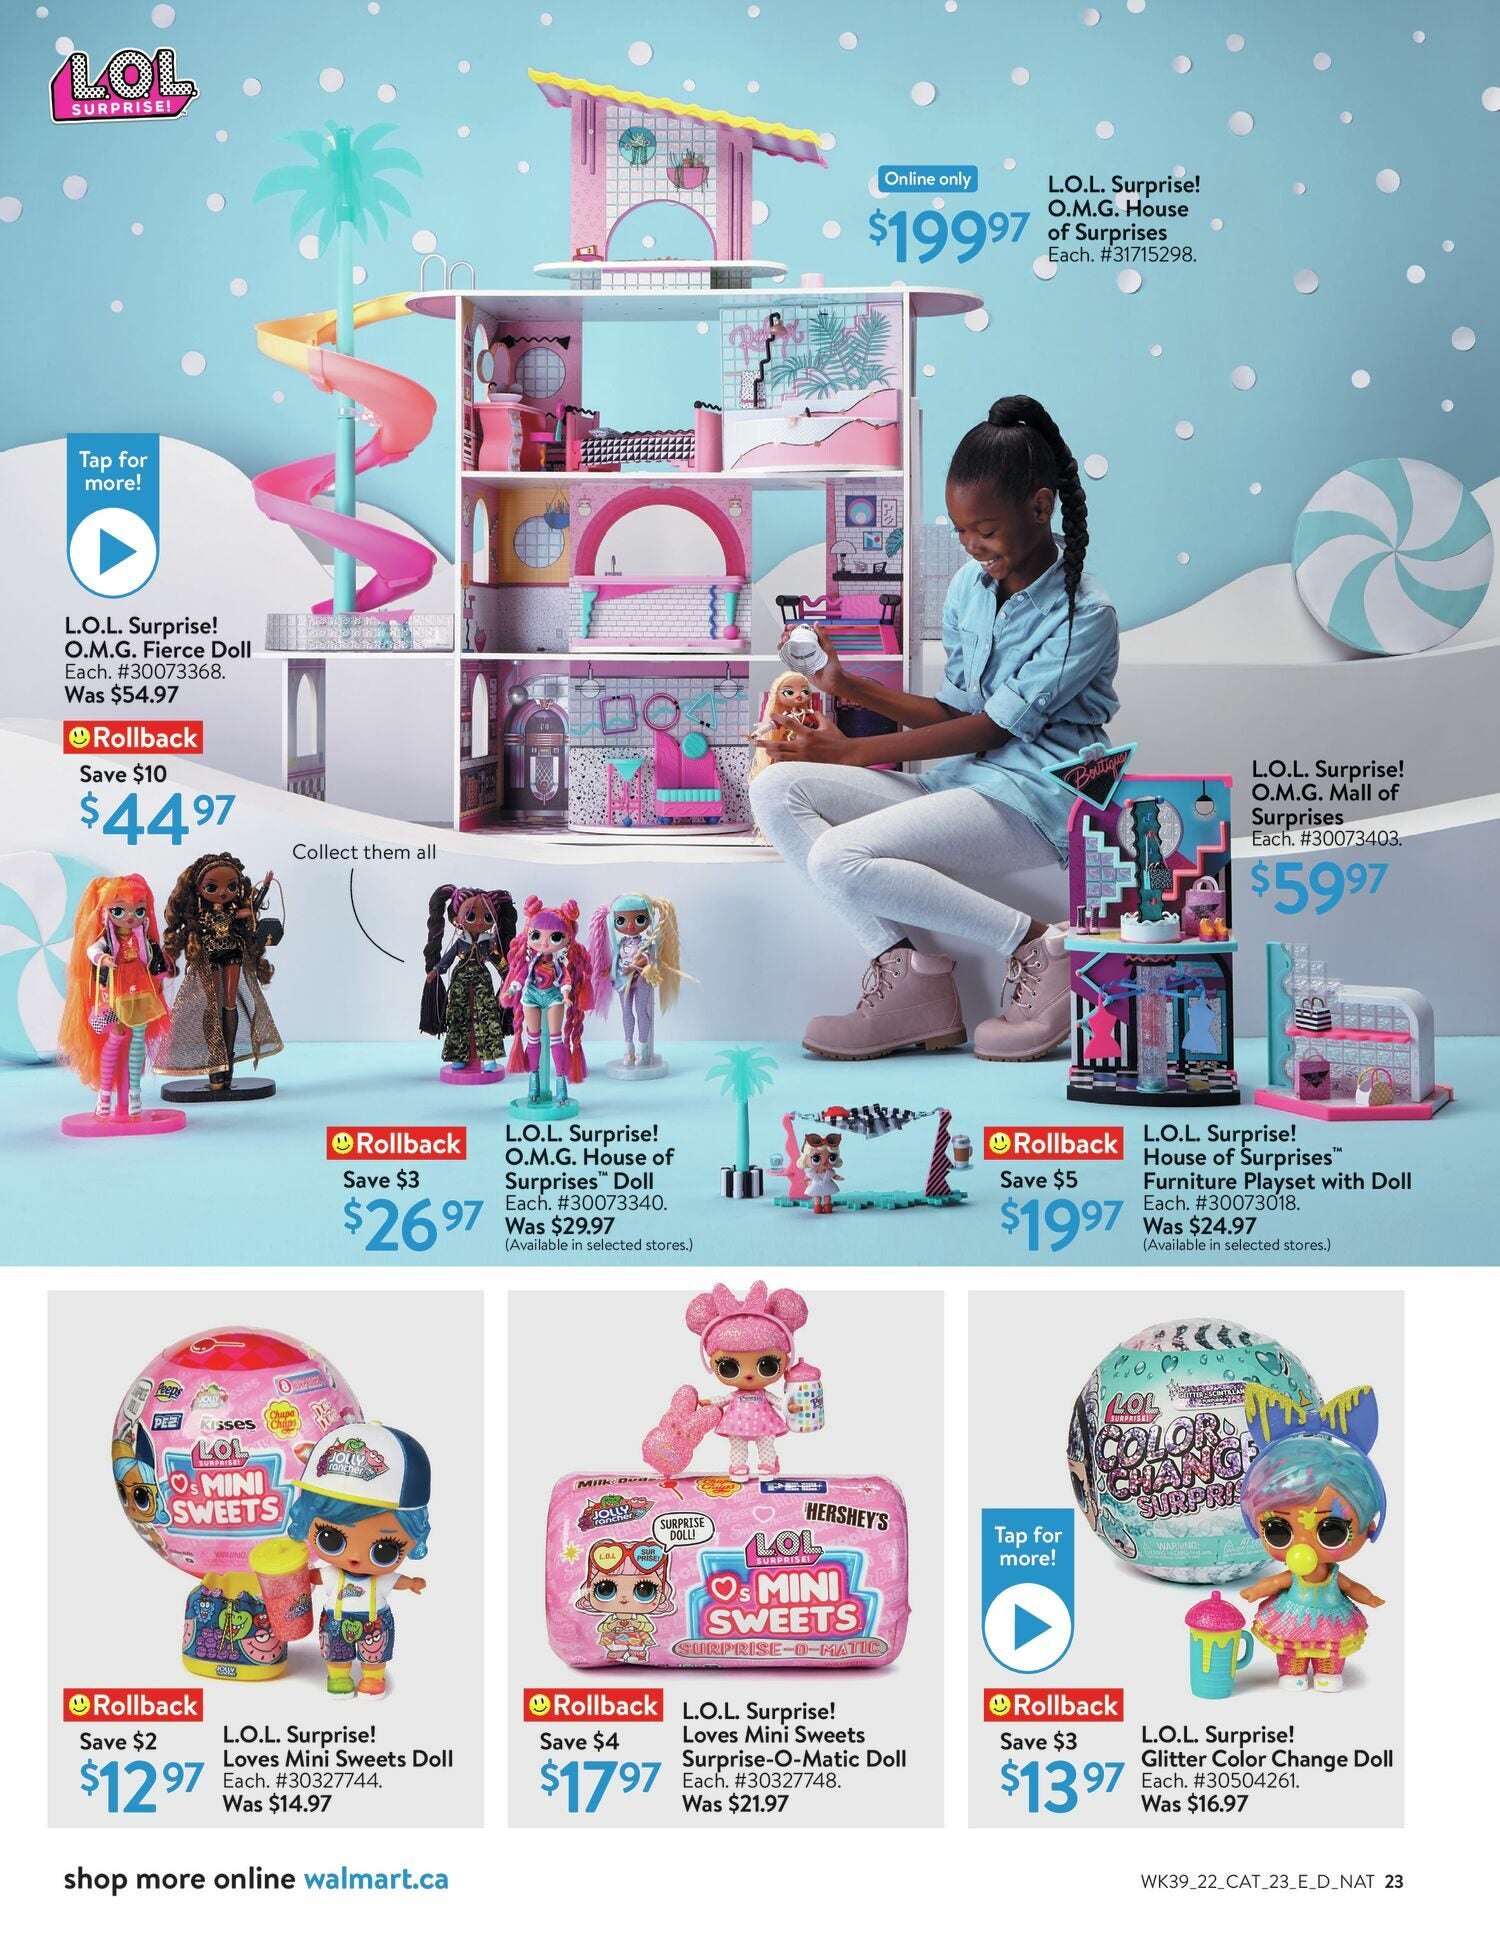 Costco Toys on Clearance, LOL Surprise Mini Sweets 4-Pack Only $6.97 +  More